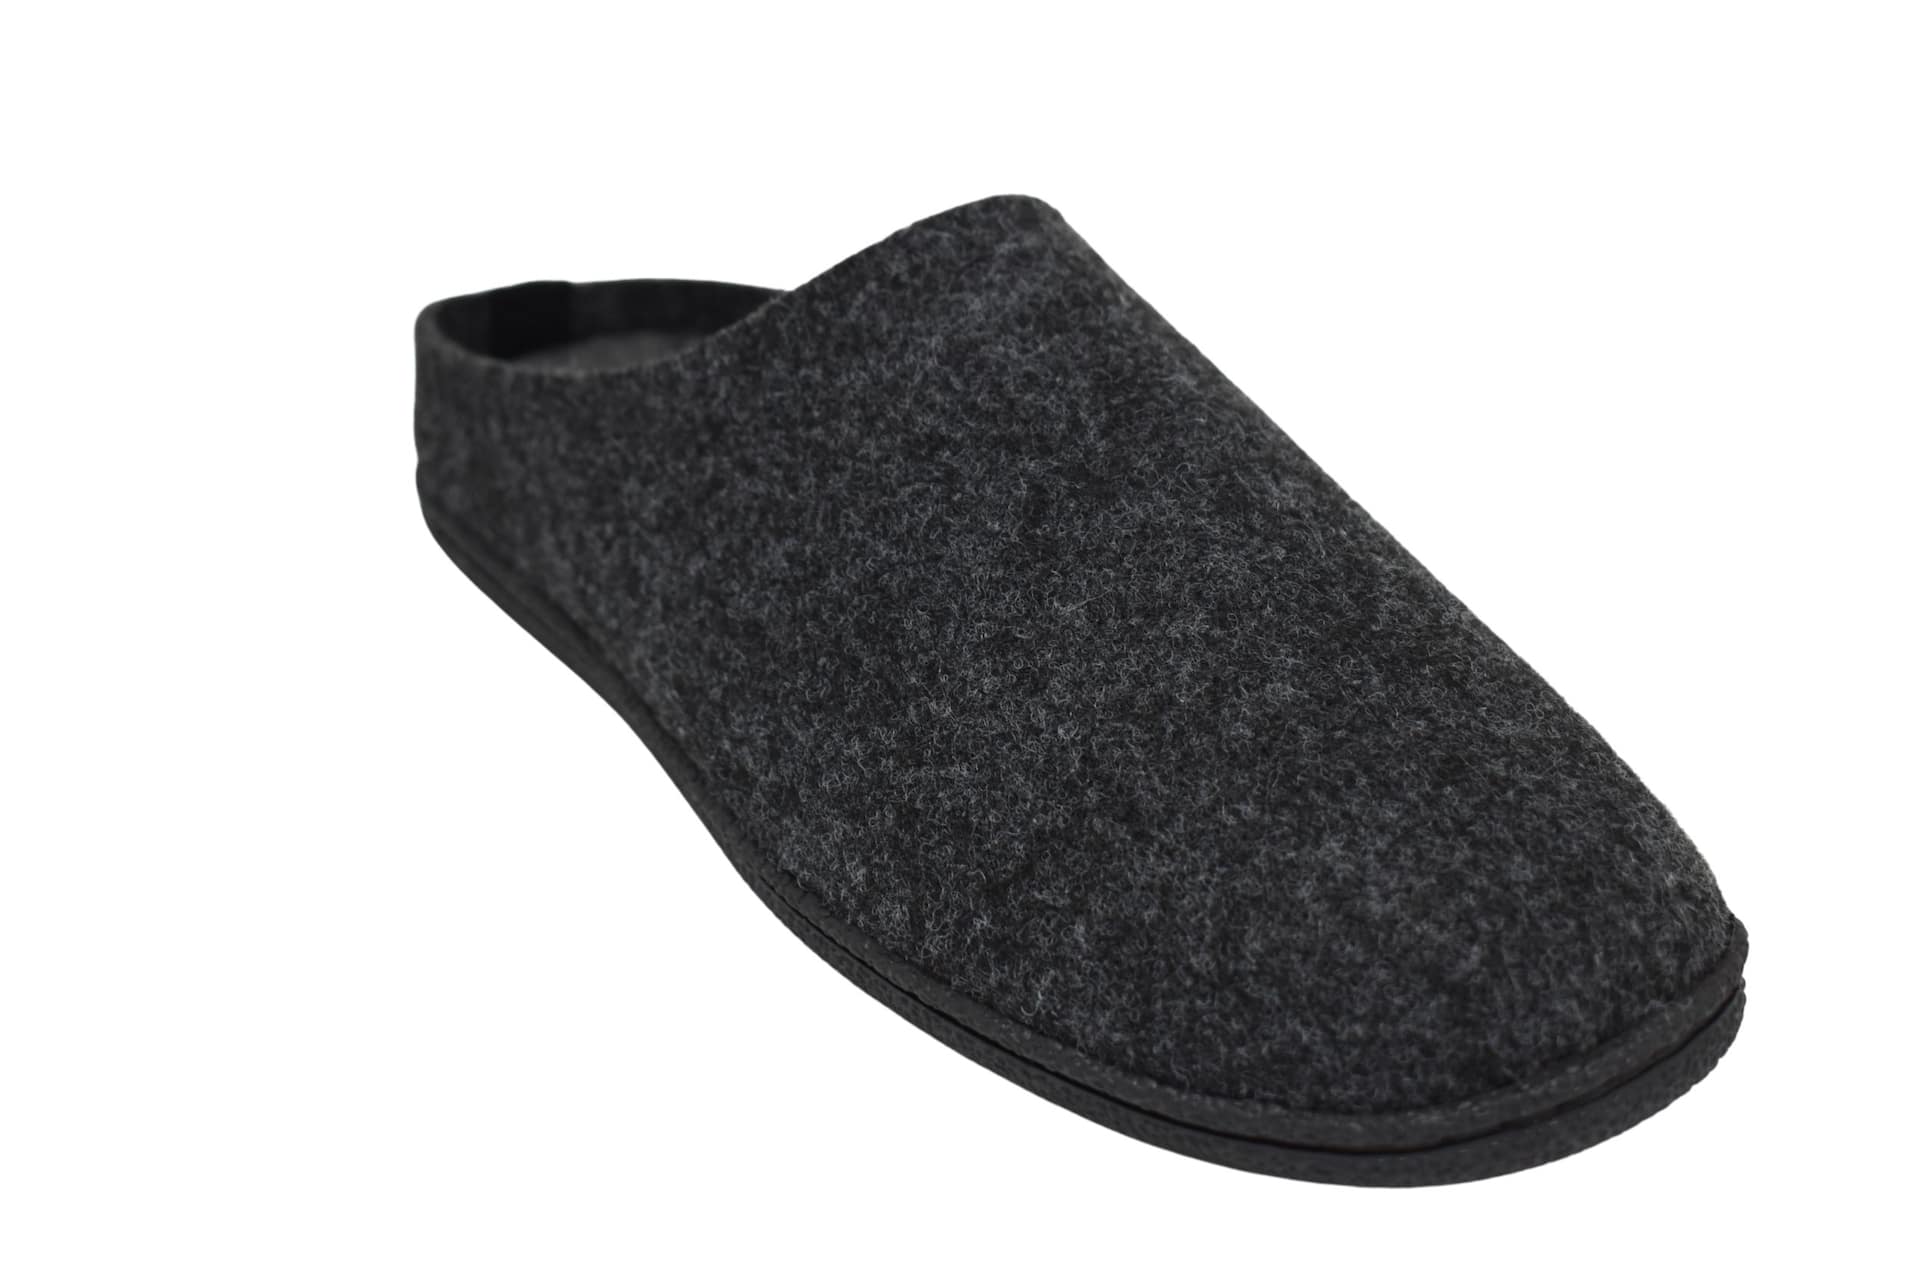 Outbound Men's Fleece Lined Leather House Slippers Indoor/Outdoor